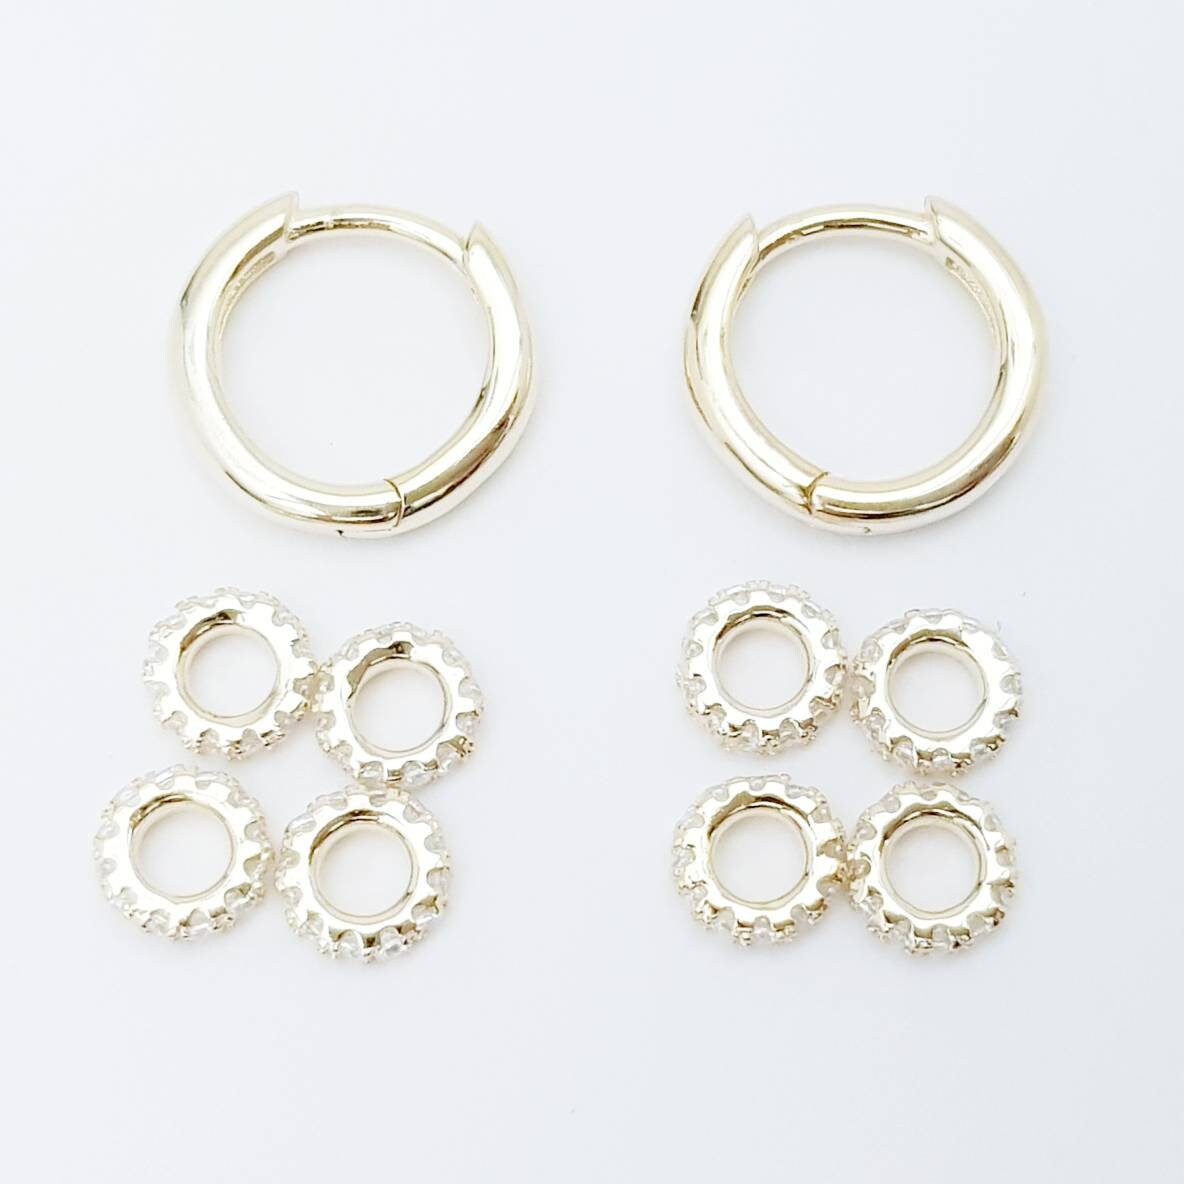 Small plain Gold Filled Hoops with removable cz charms, two earrings in one, mini diamond huggie earrings